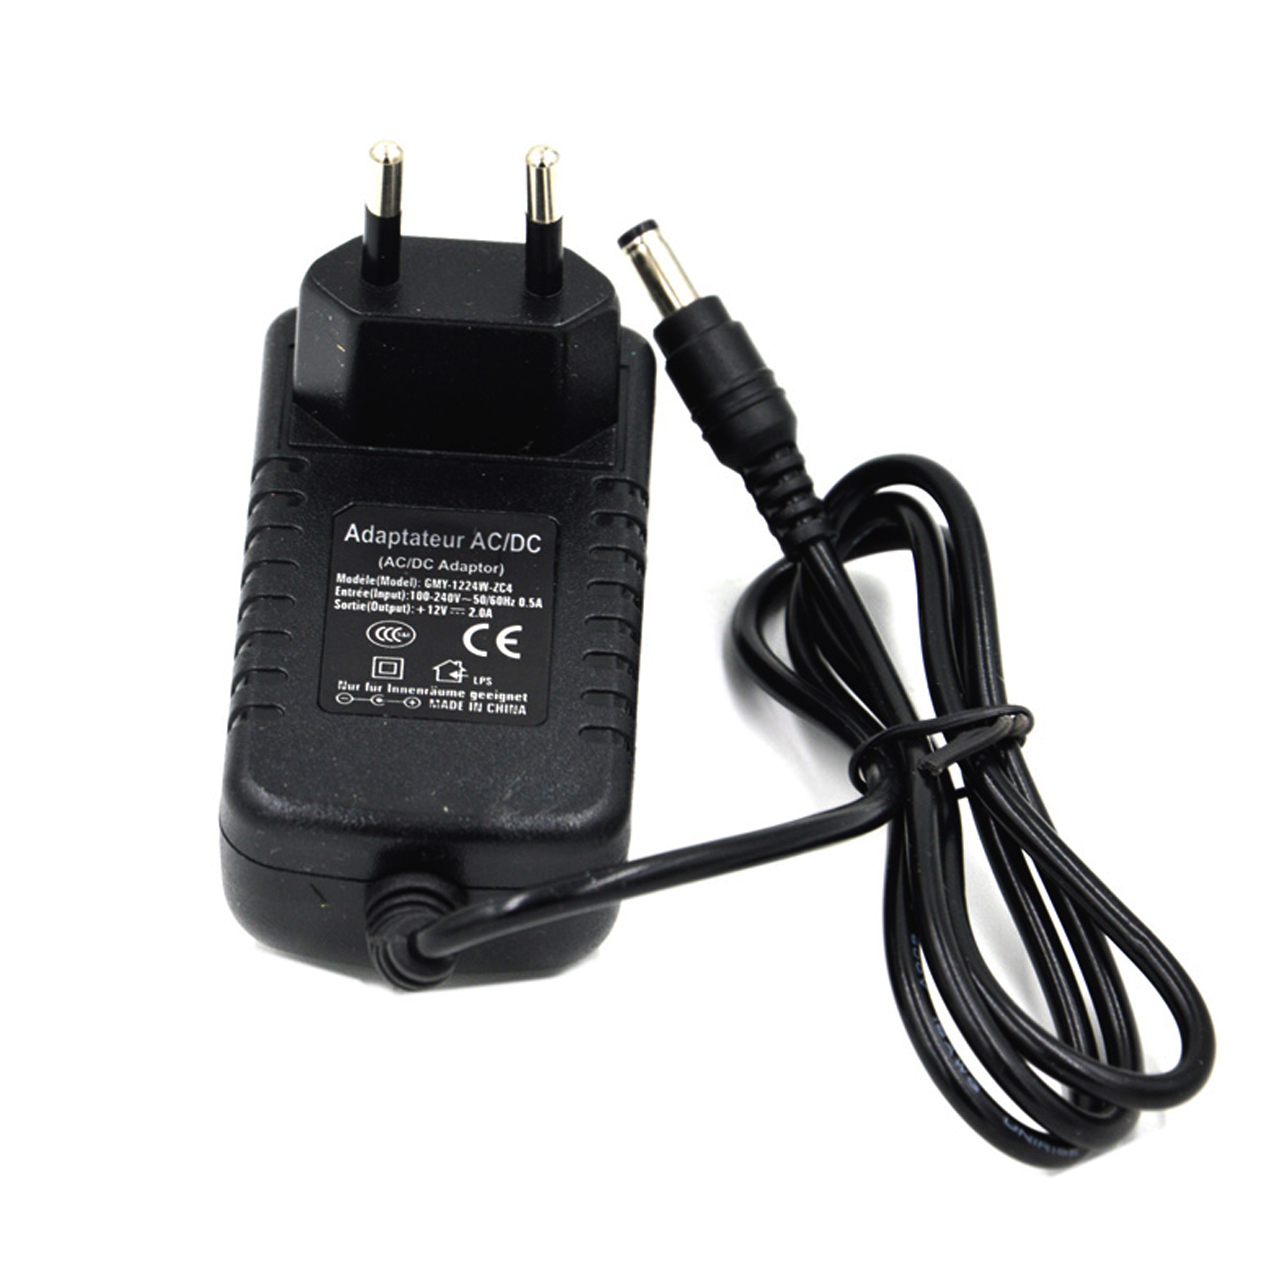 Chargeur 12v 2A Adaptateur AC 100-240v DC 12V Power Adapter